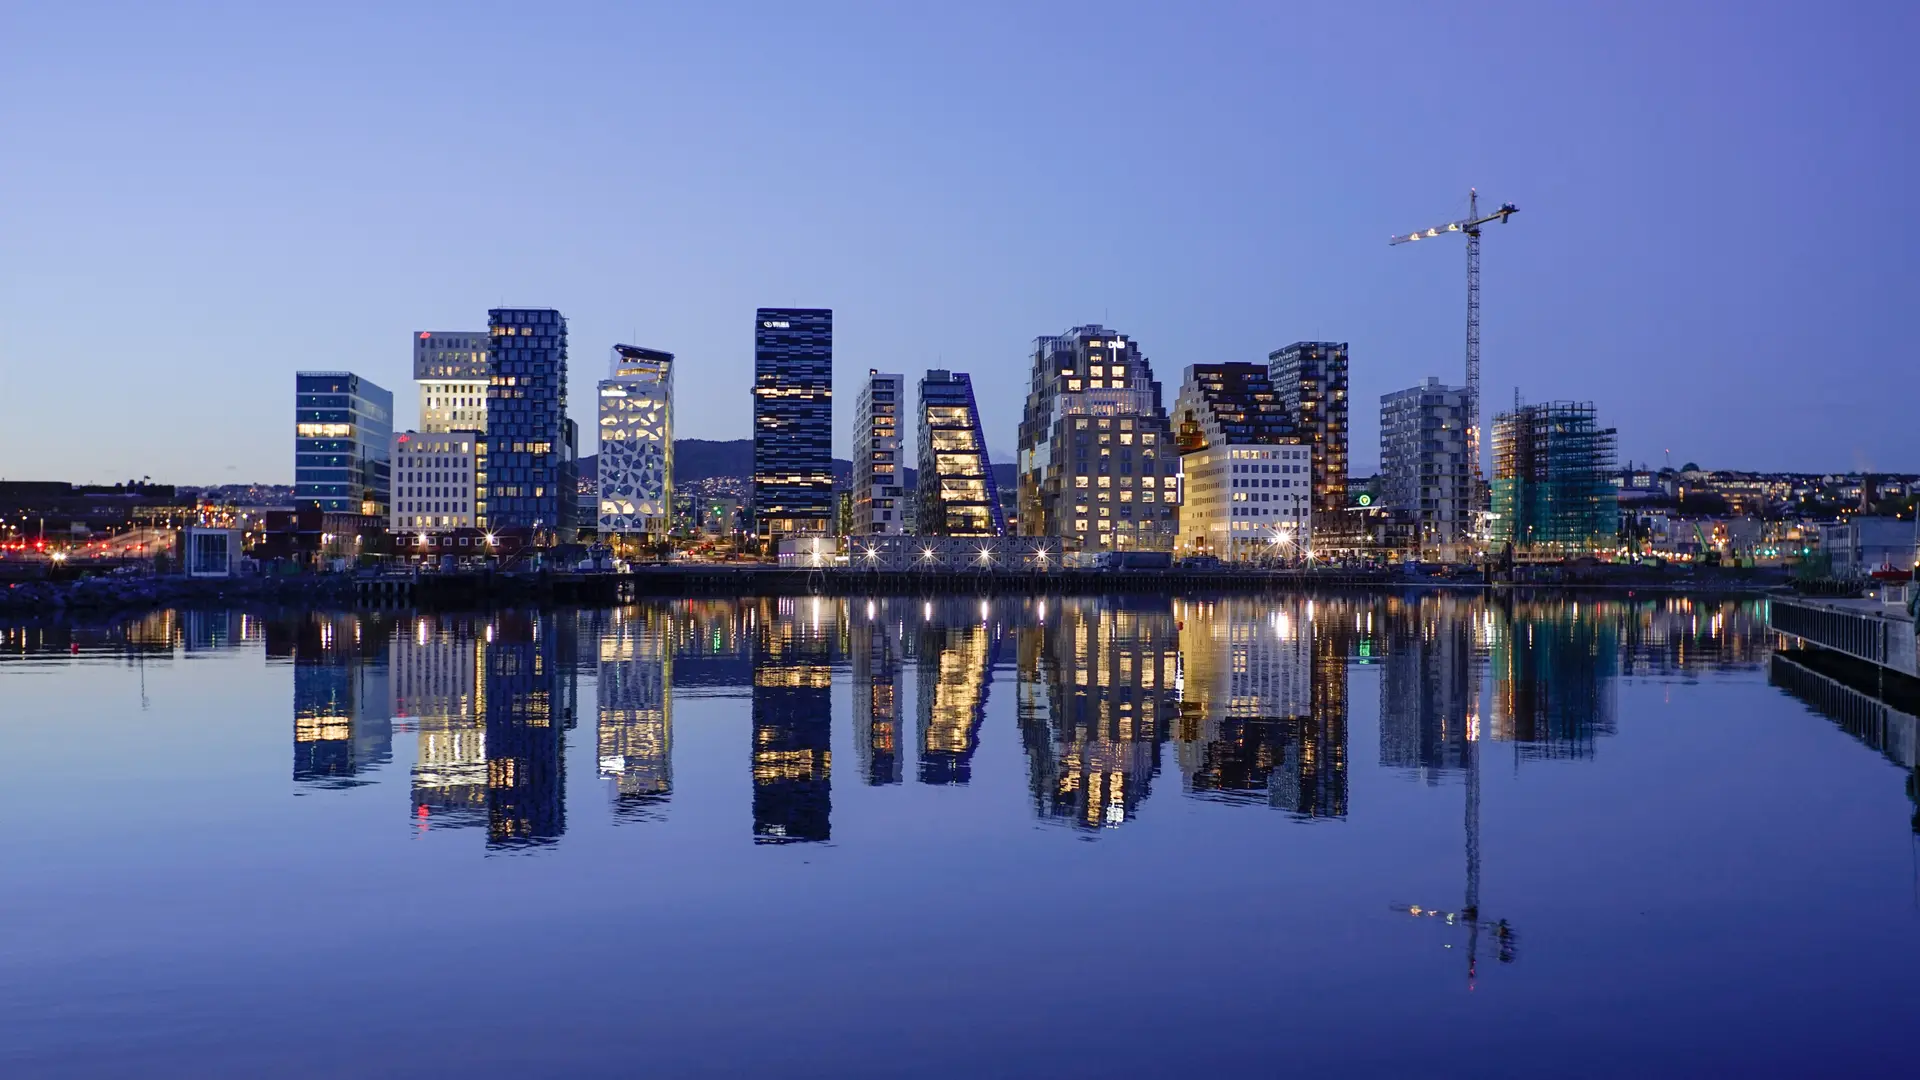 View from the water of capital of Norway, Oslo. With large and tall buildings, cool water and city lights.